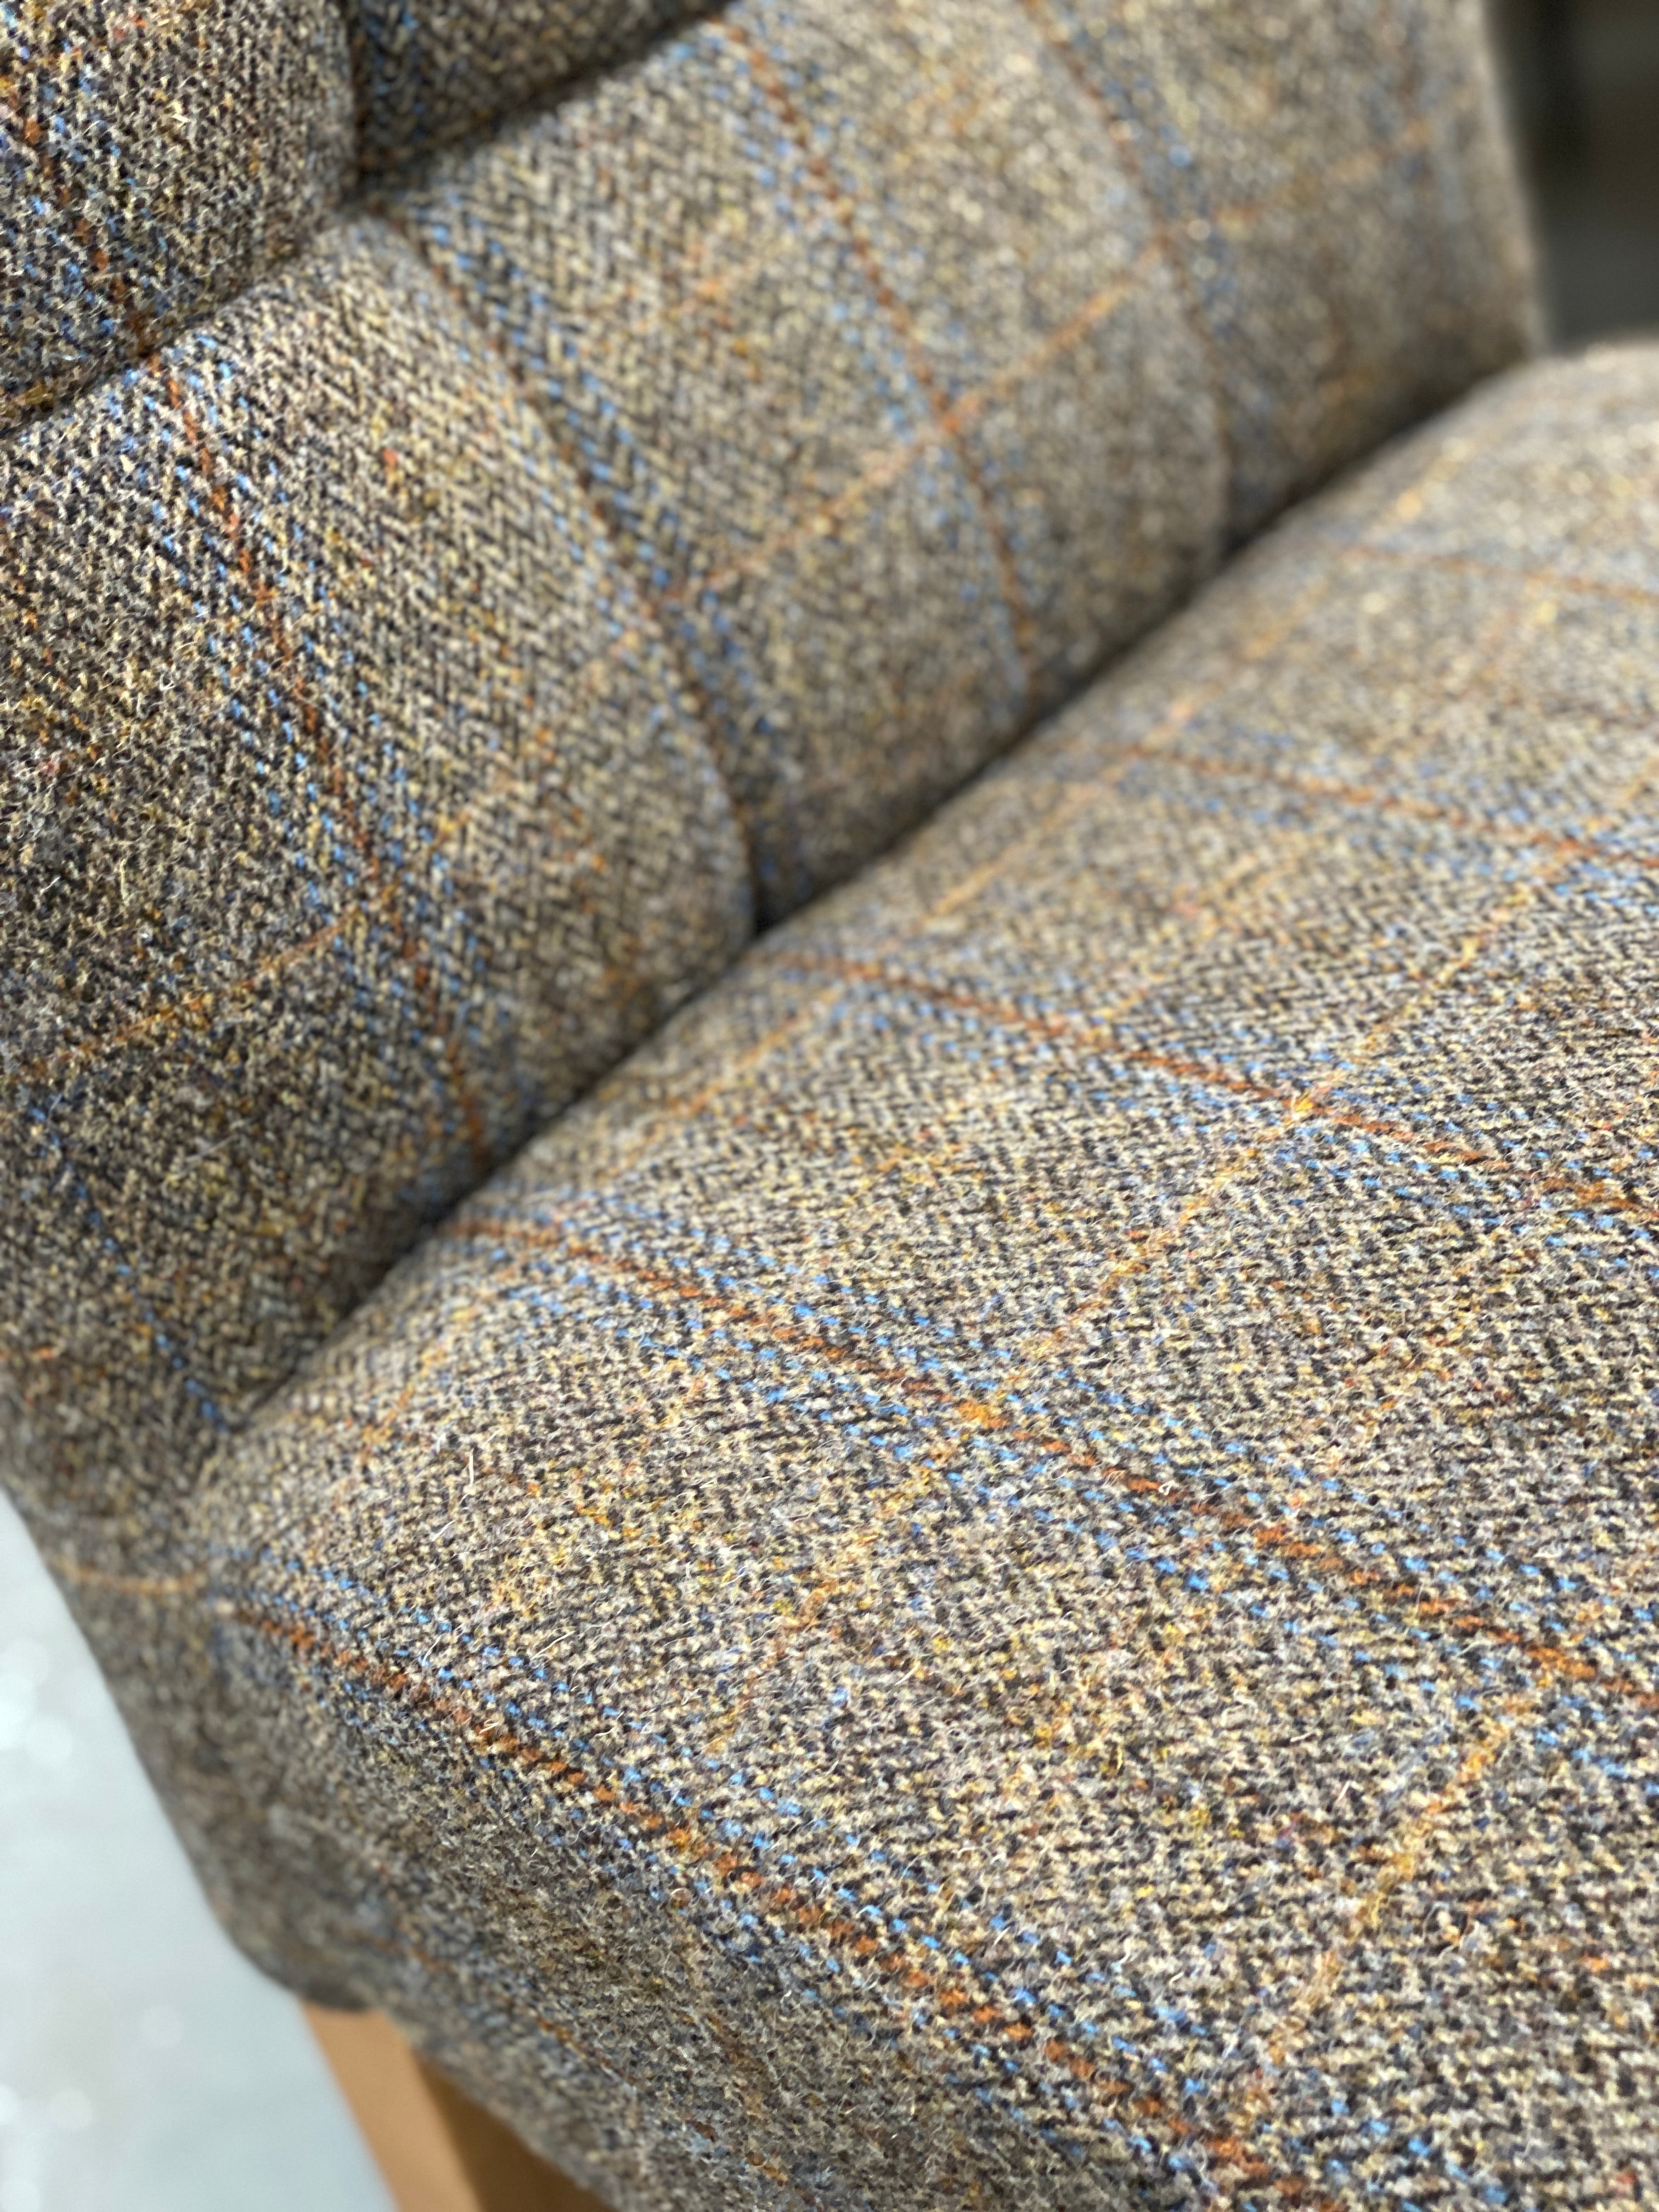 Colin Harris Tweed Dining Chairs from Top Secret Furniture